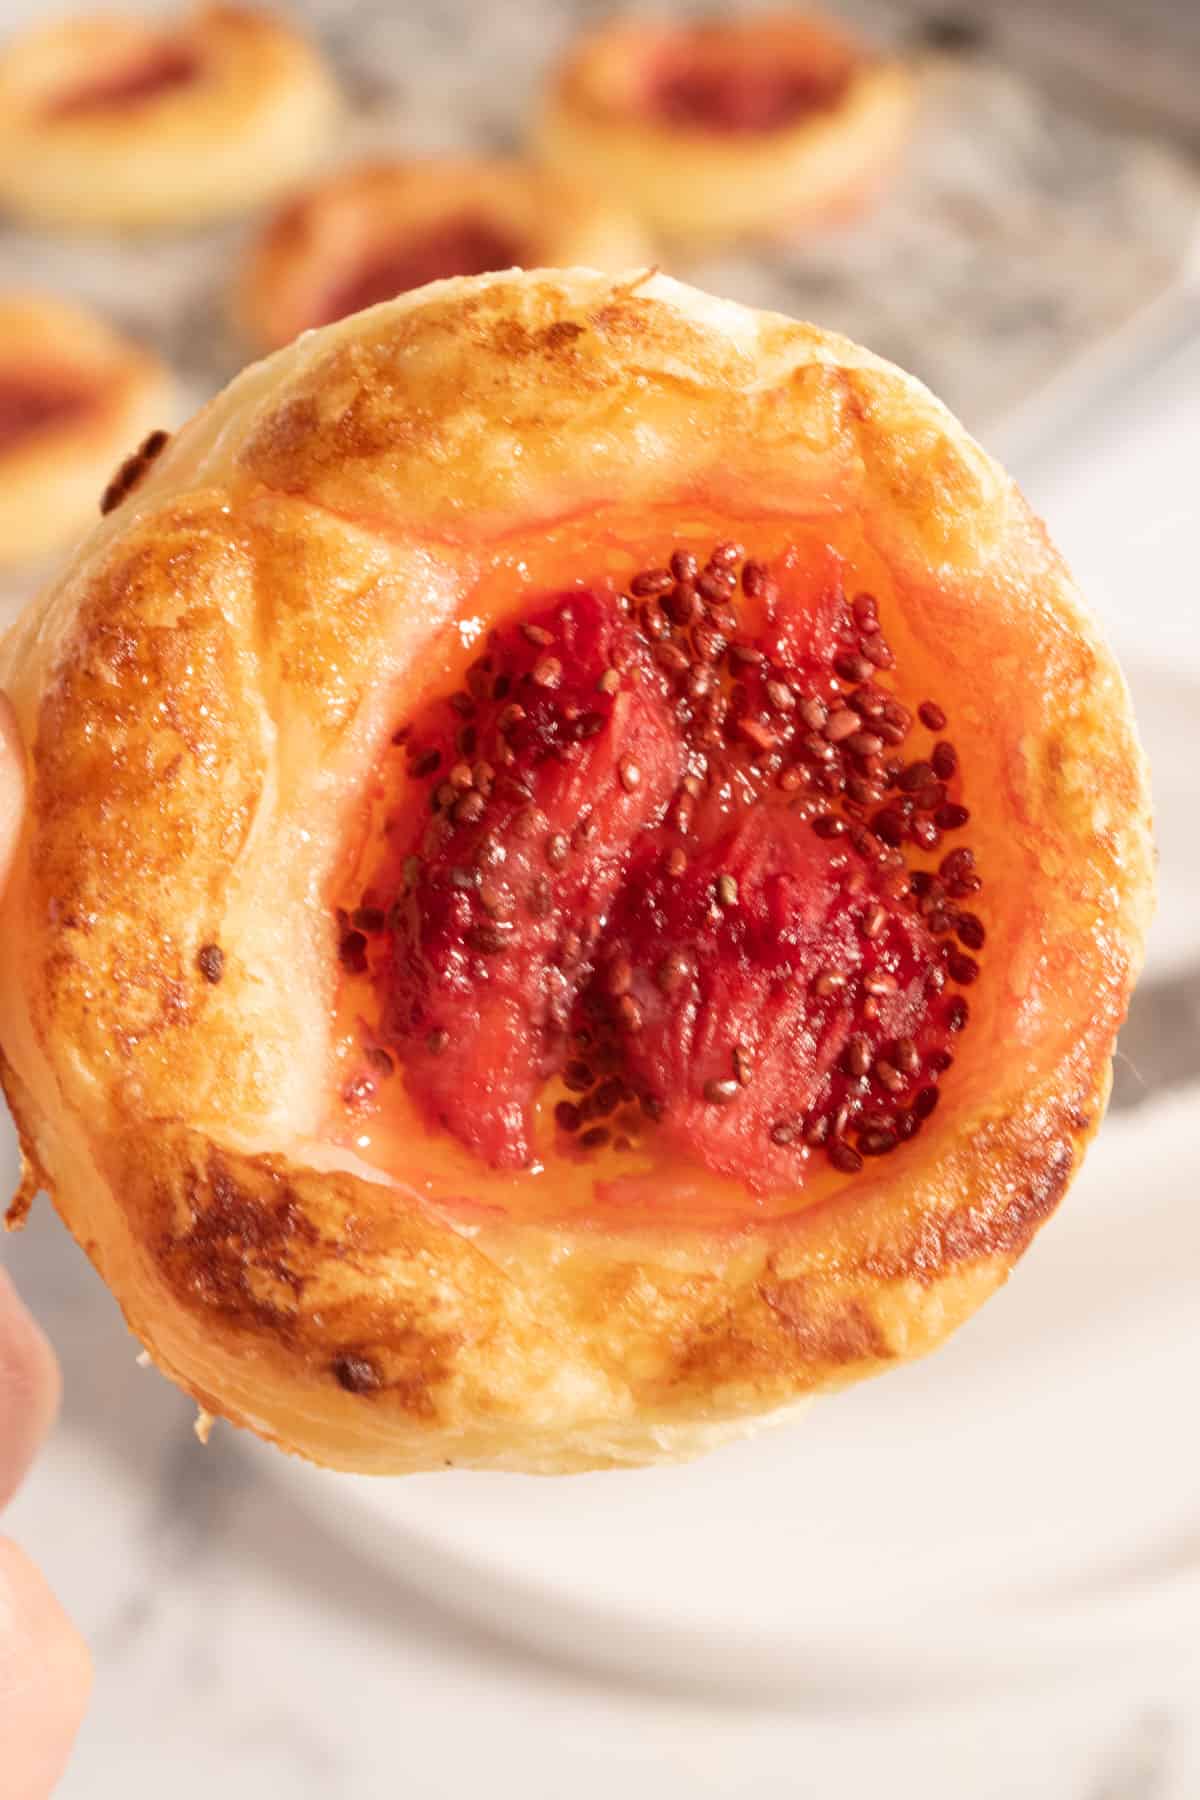 A golden, undecorated pastry which is filled with lots of jam.